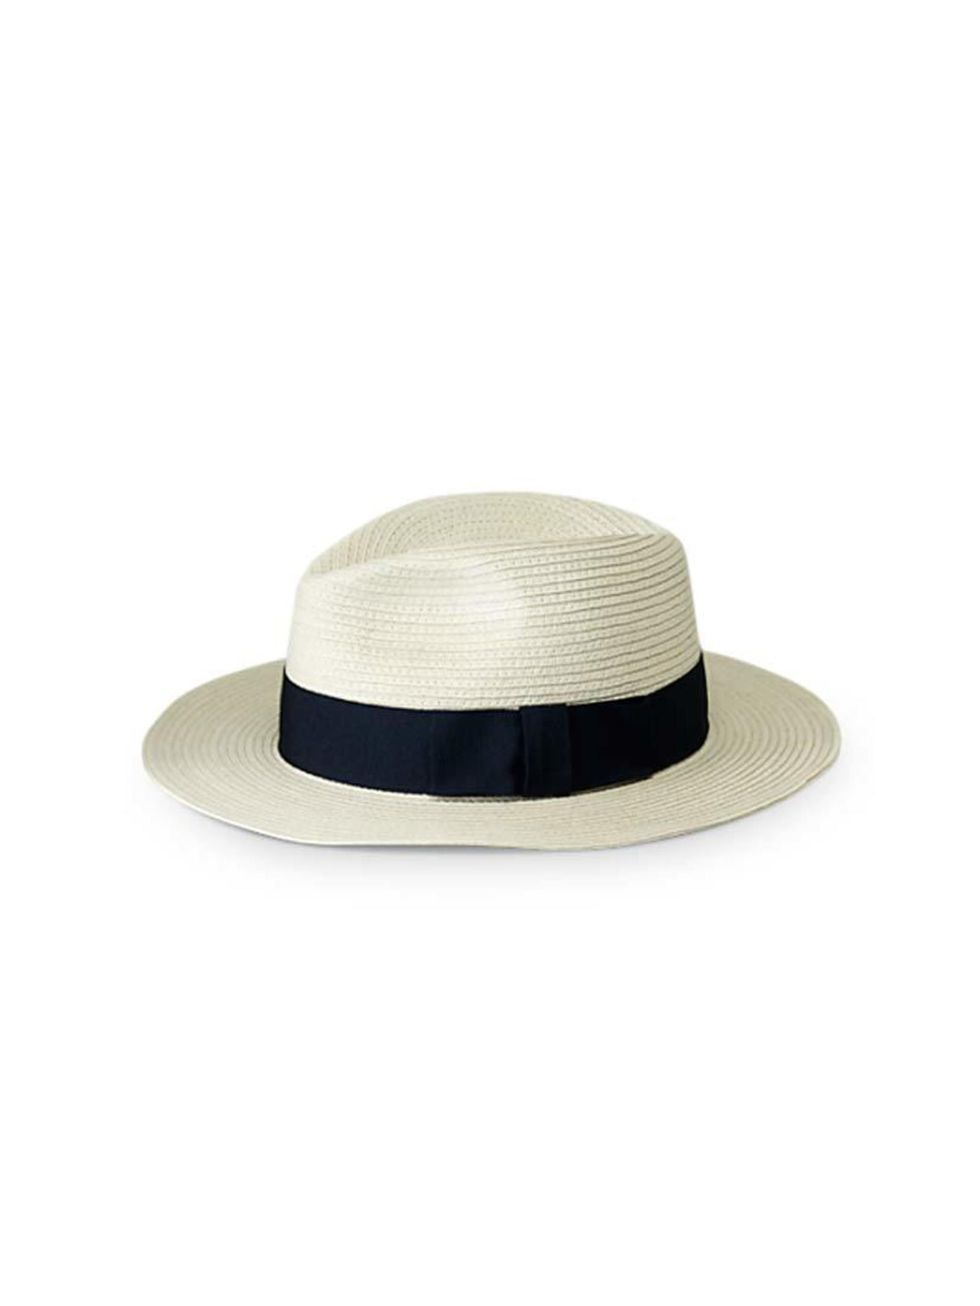 <p>Good for pretending to be on safari - when you're actually just watching your cat stalk a bumble bee in the back garden.</p>

<p><a href="http://www.filippa-k.com/en/woman/beachwear/paper-straw-hat" target="_blank">Filippa K</a> hat, £75</p>